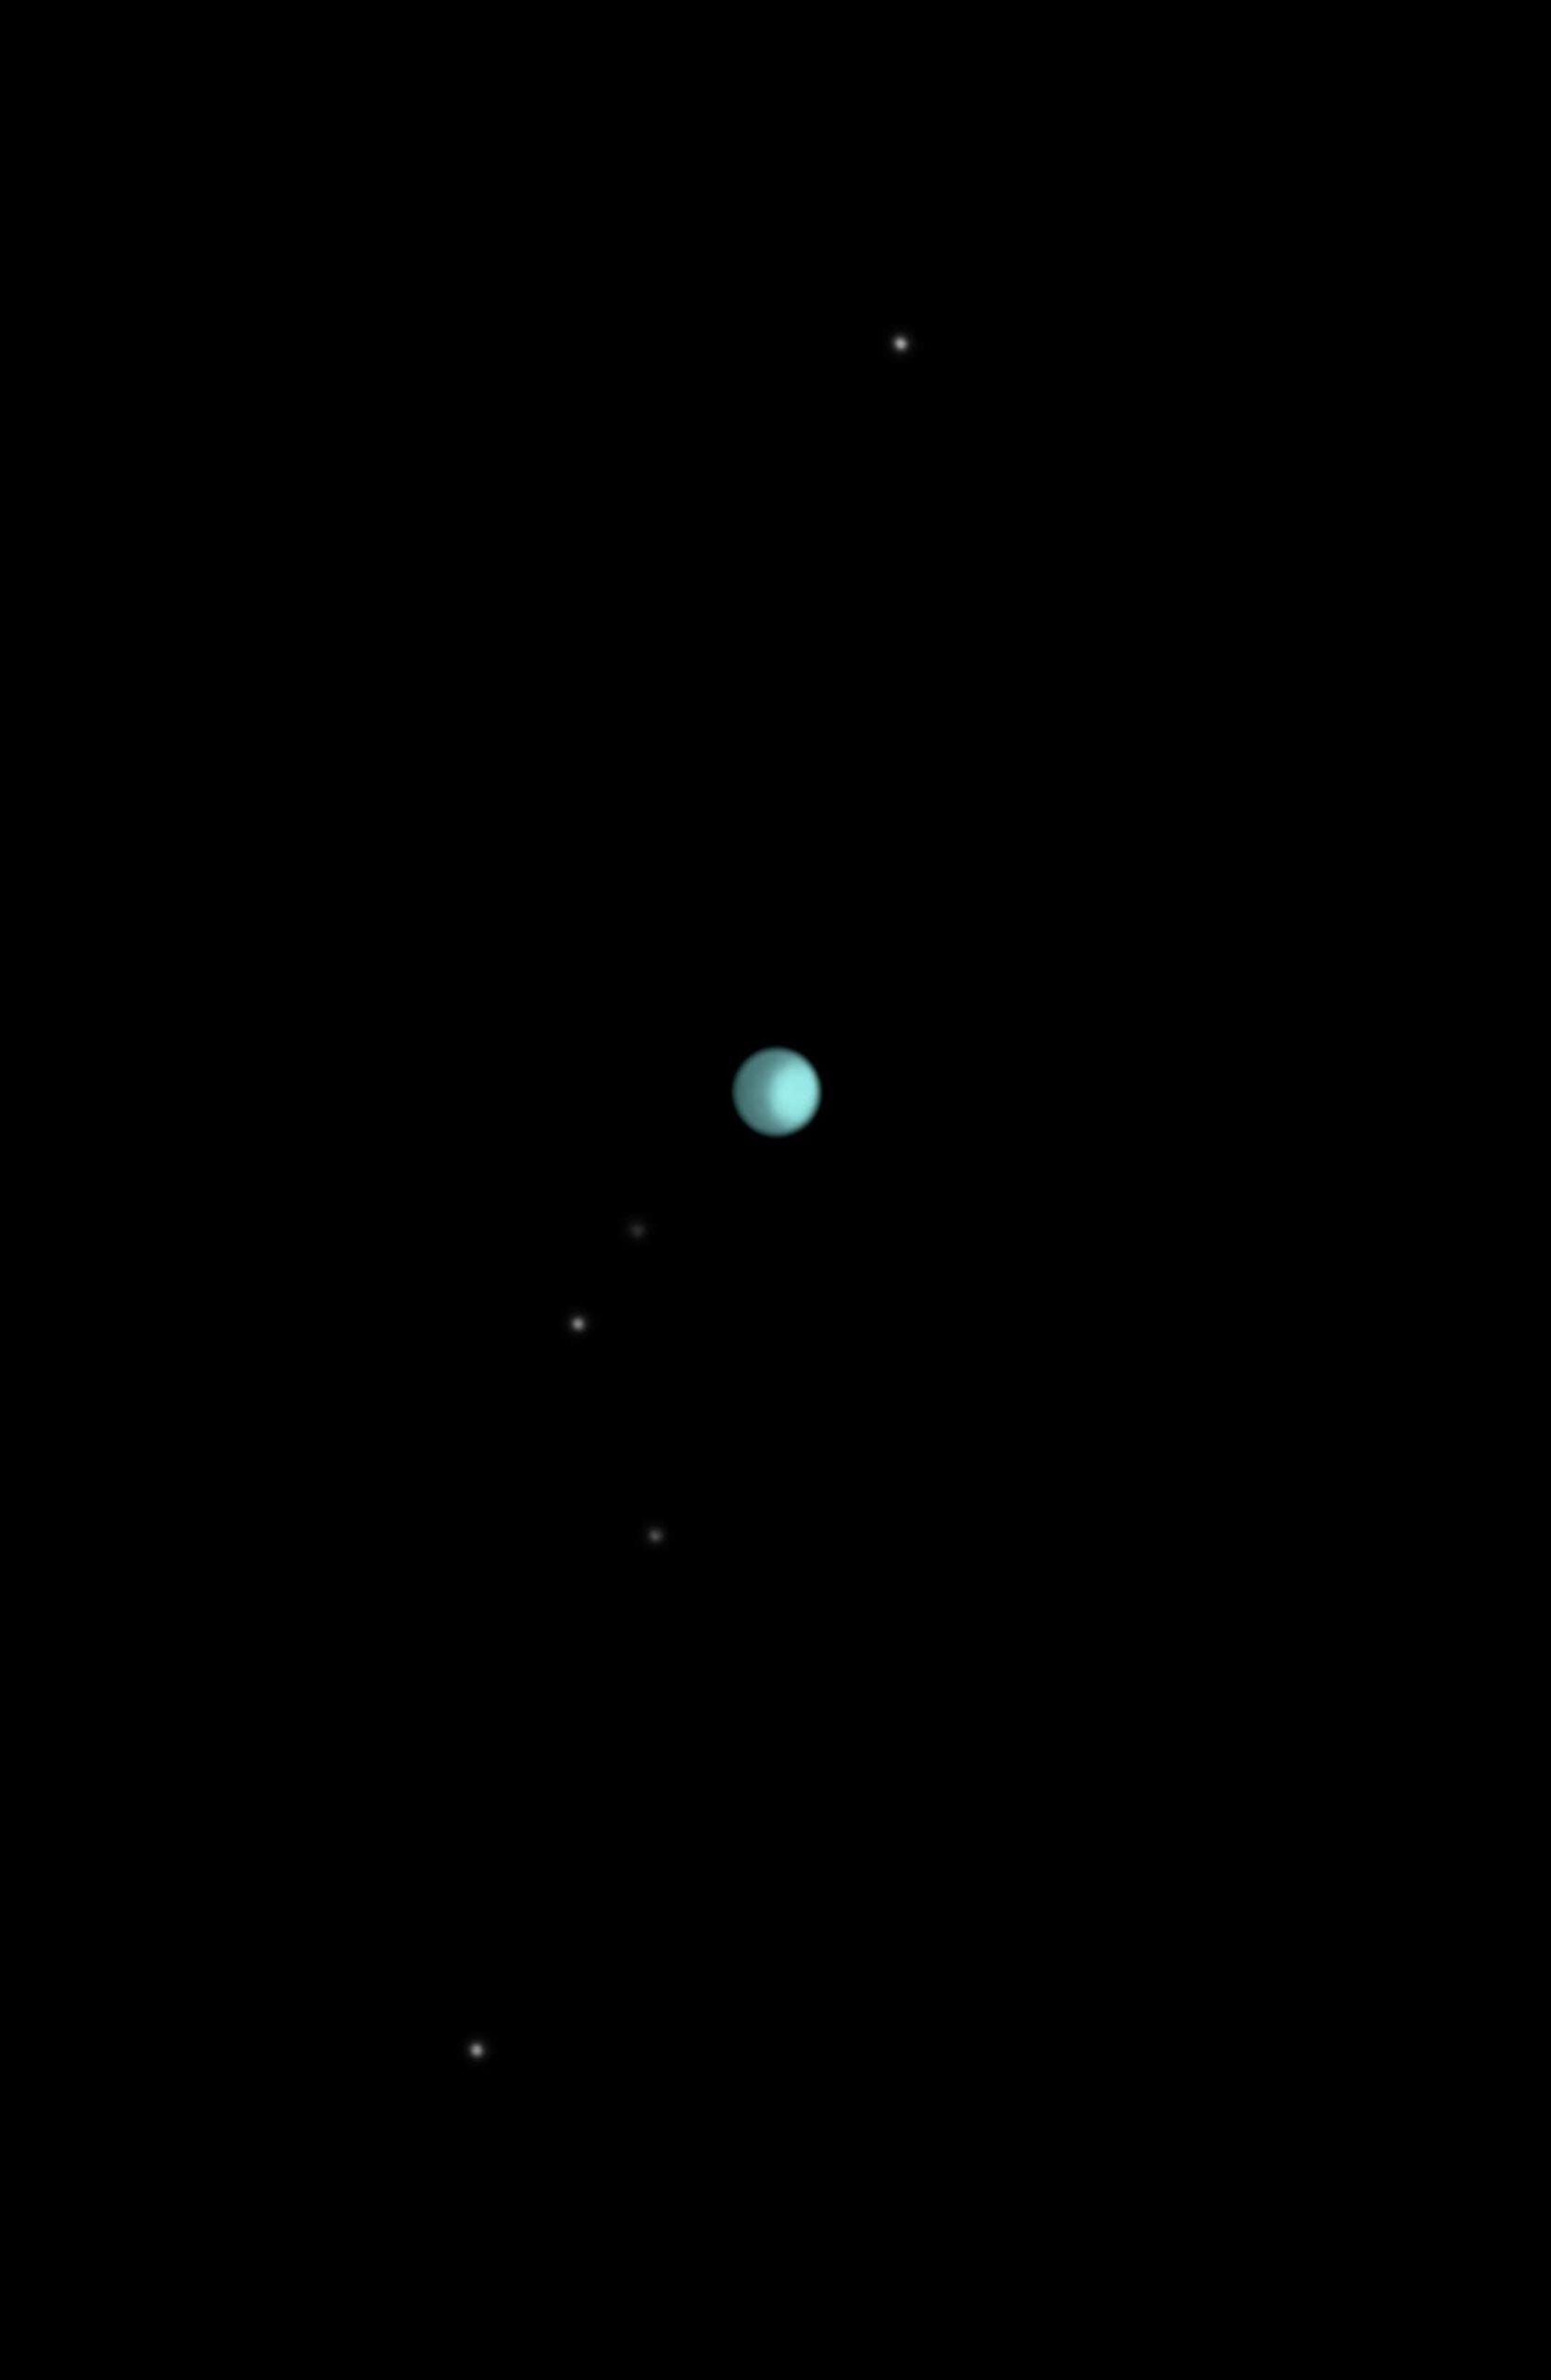 Distant photo of Uranus and its five moons